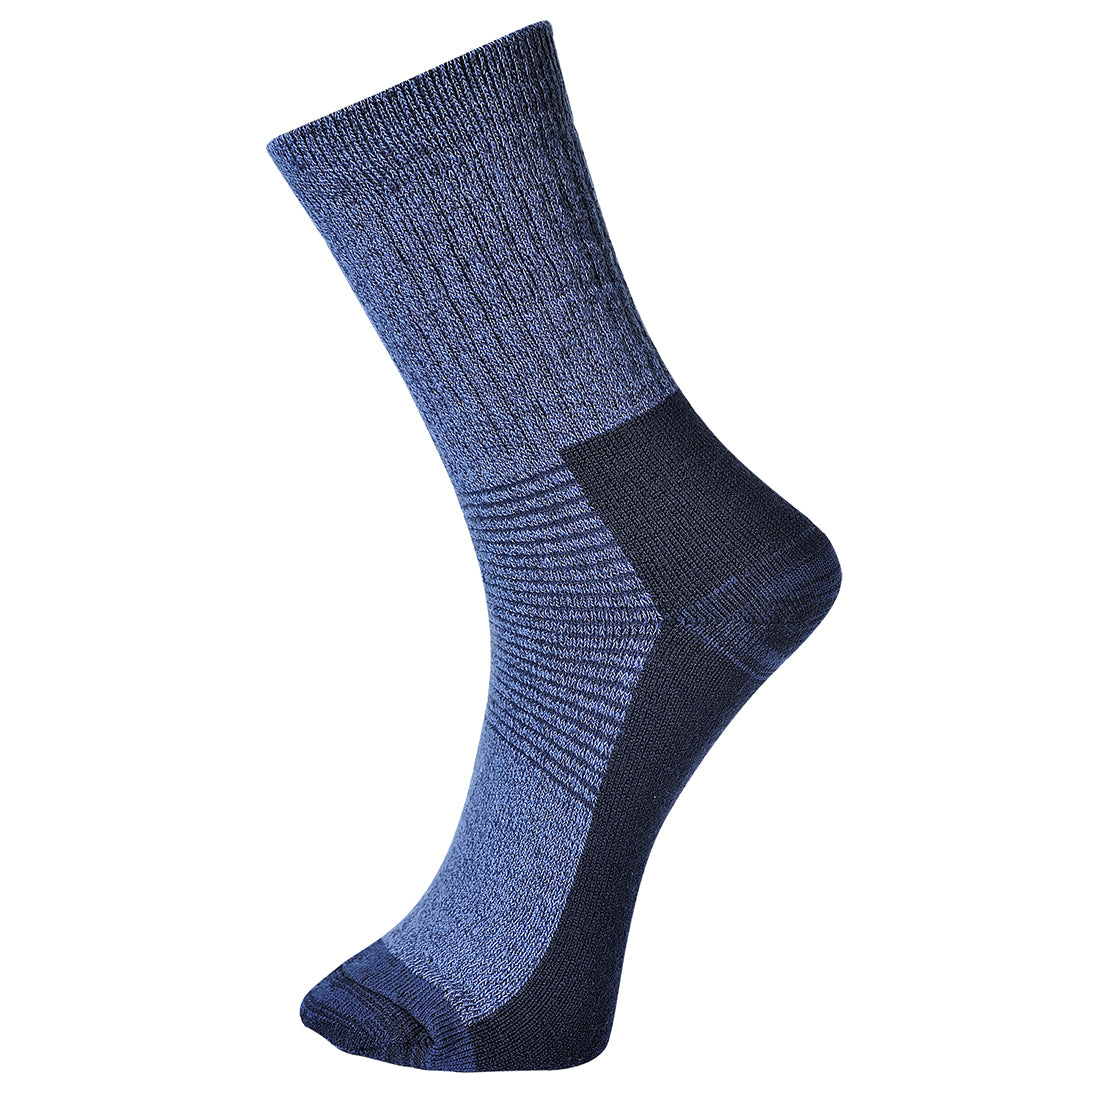 Thermal Sock Blue and Black - SK11